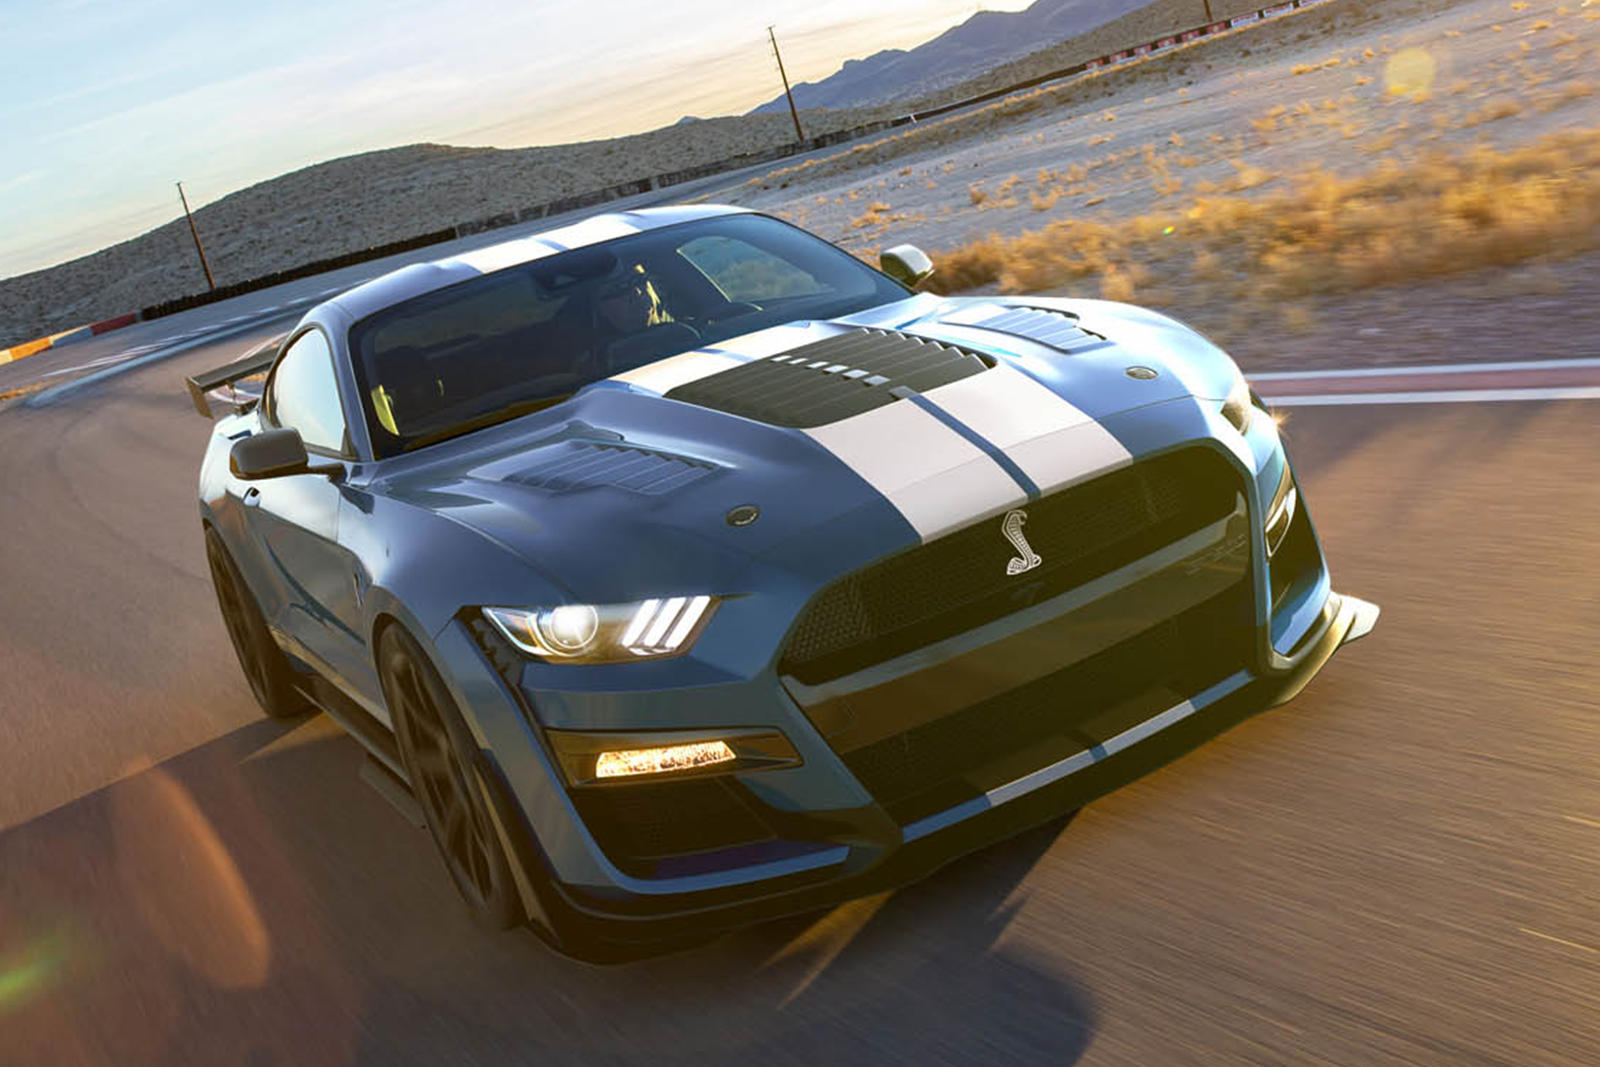 Shelby American's New 800-HP Mustang Shelby GT500SE Has Arrived - CarBuzz